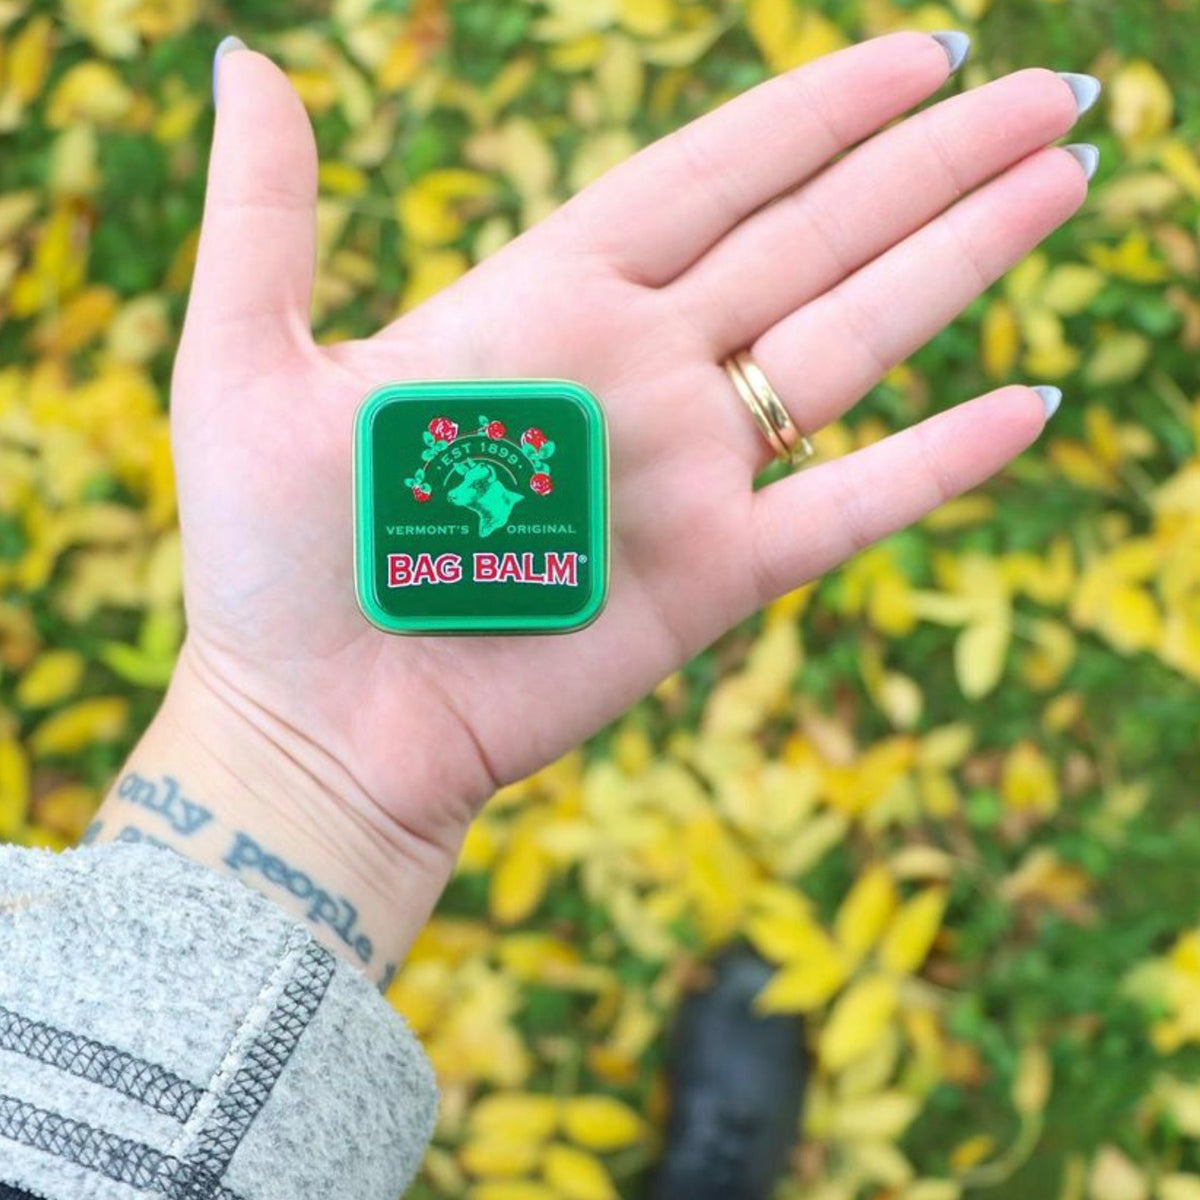 A small in of Bag Balm in a person's open palm